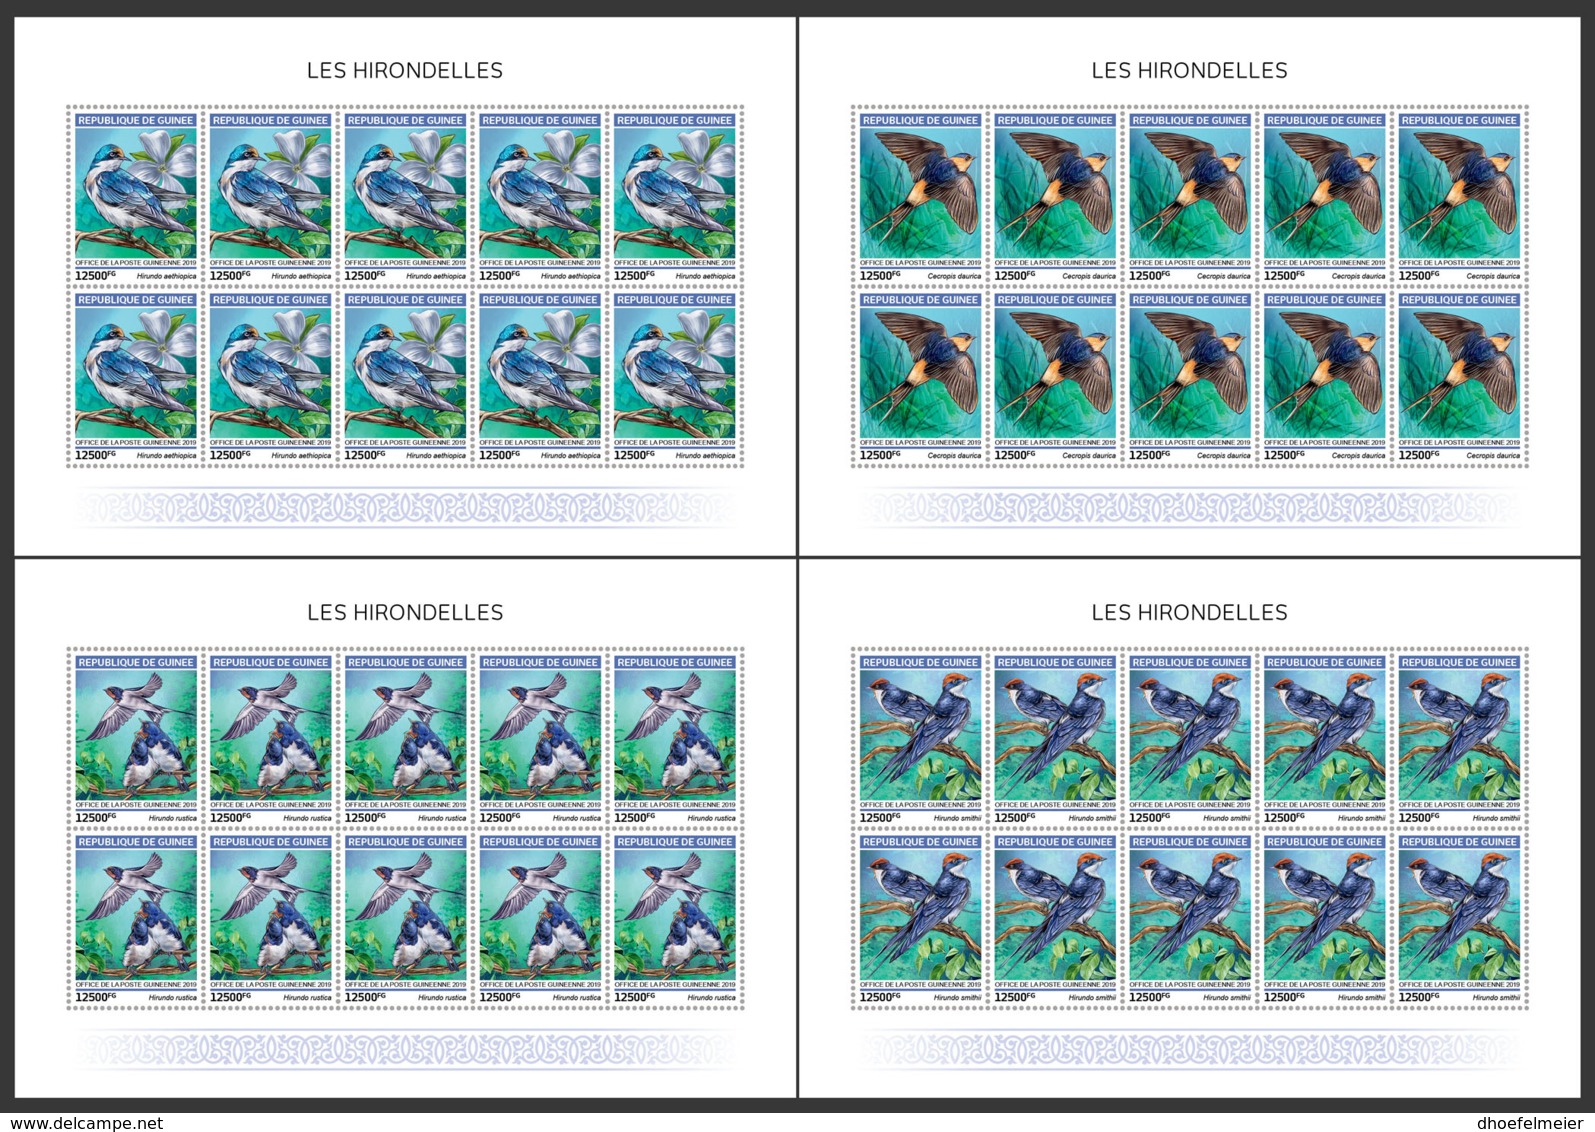 GUINEA REP. 2019 MNH Swallows Schwalben Hirondelles M/S - IMPERFORATED - DH1918 - Hirondelles